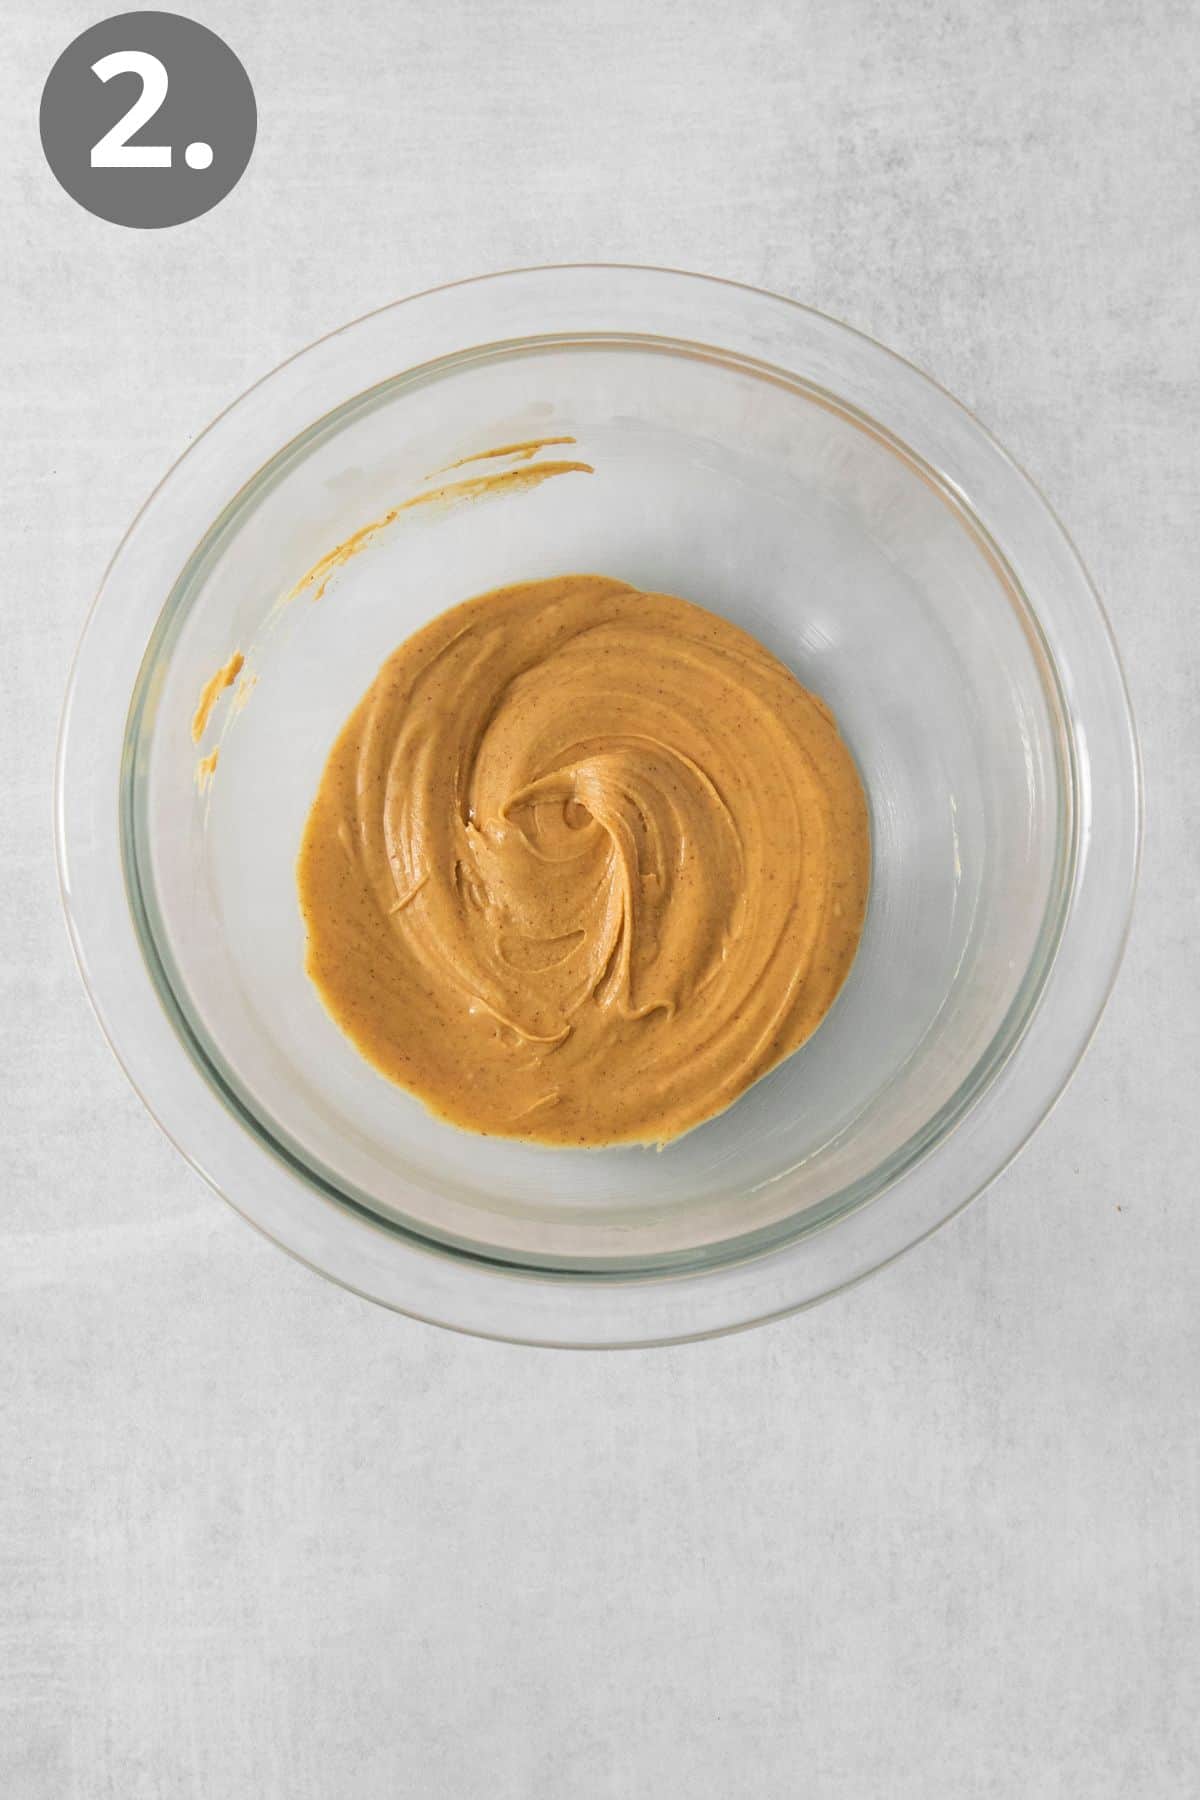 Peanut butter in a mixing bowl